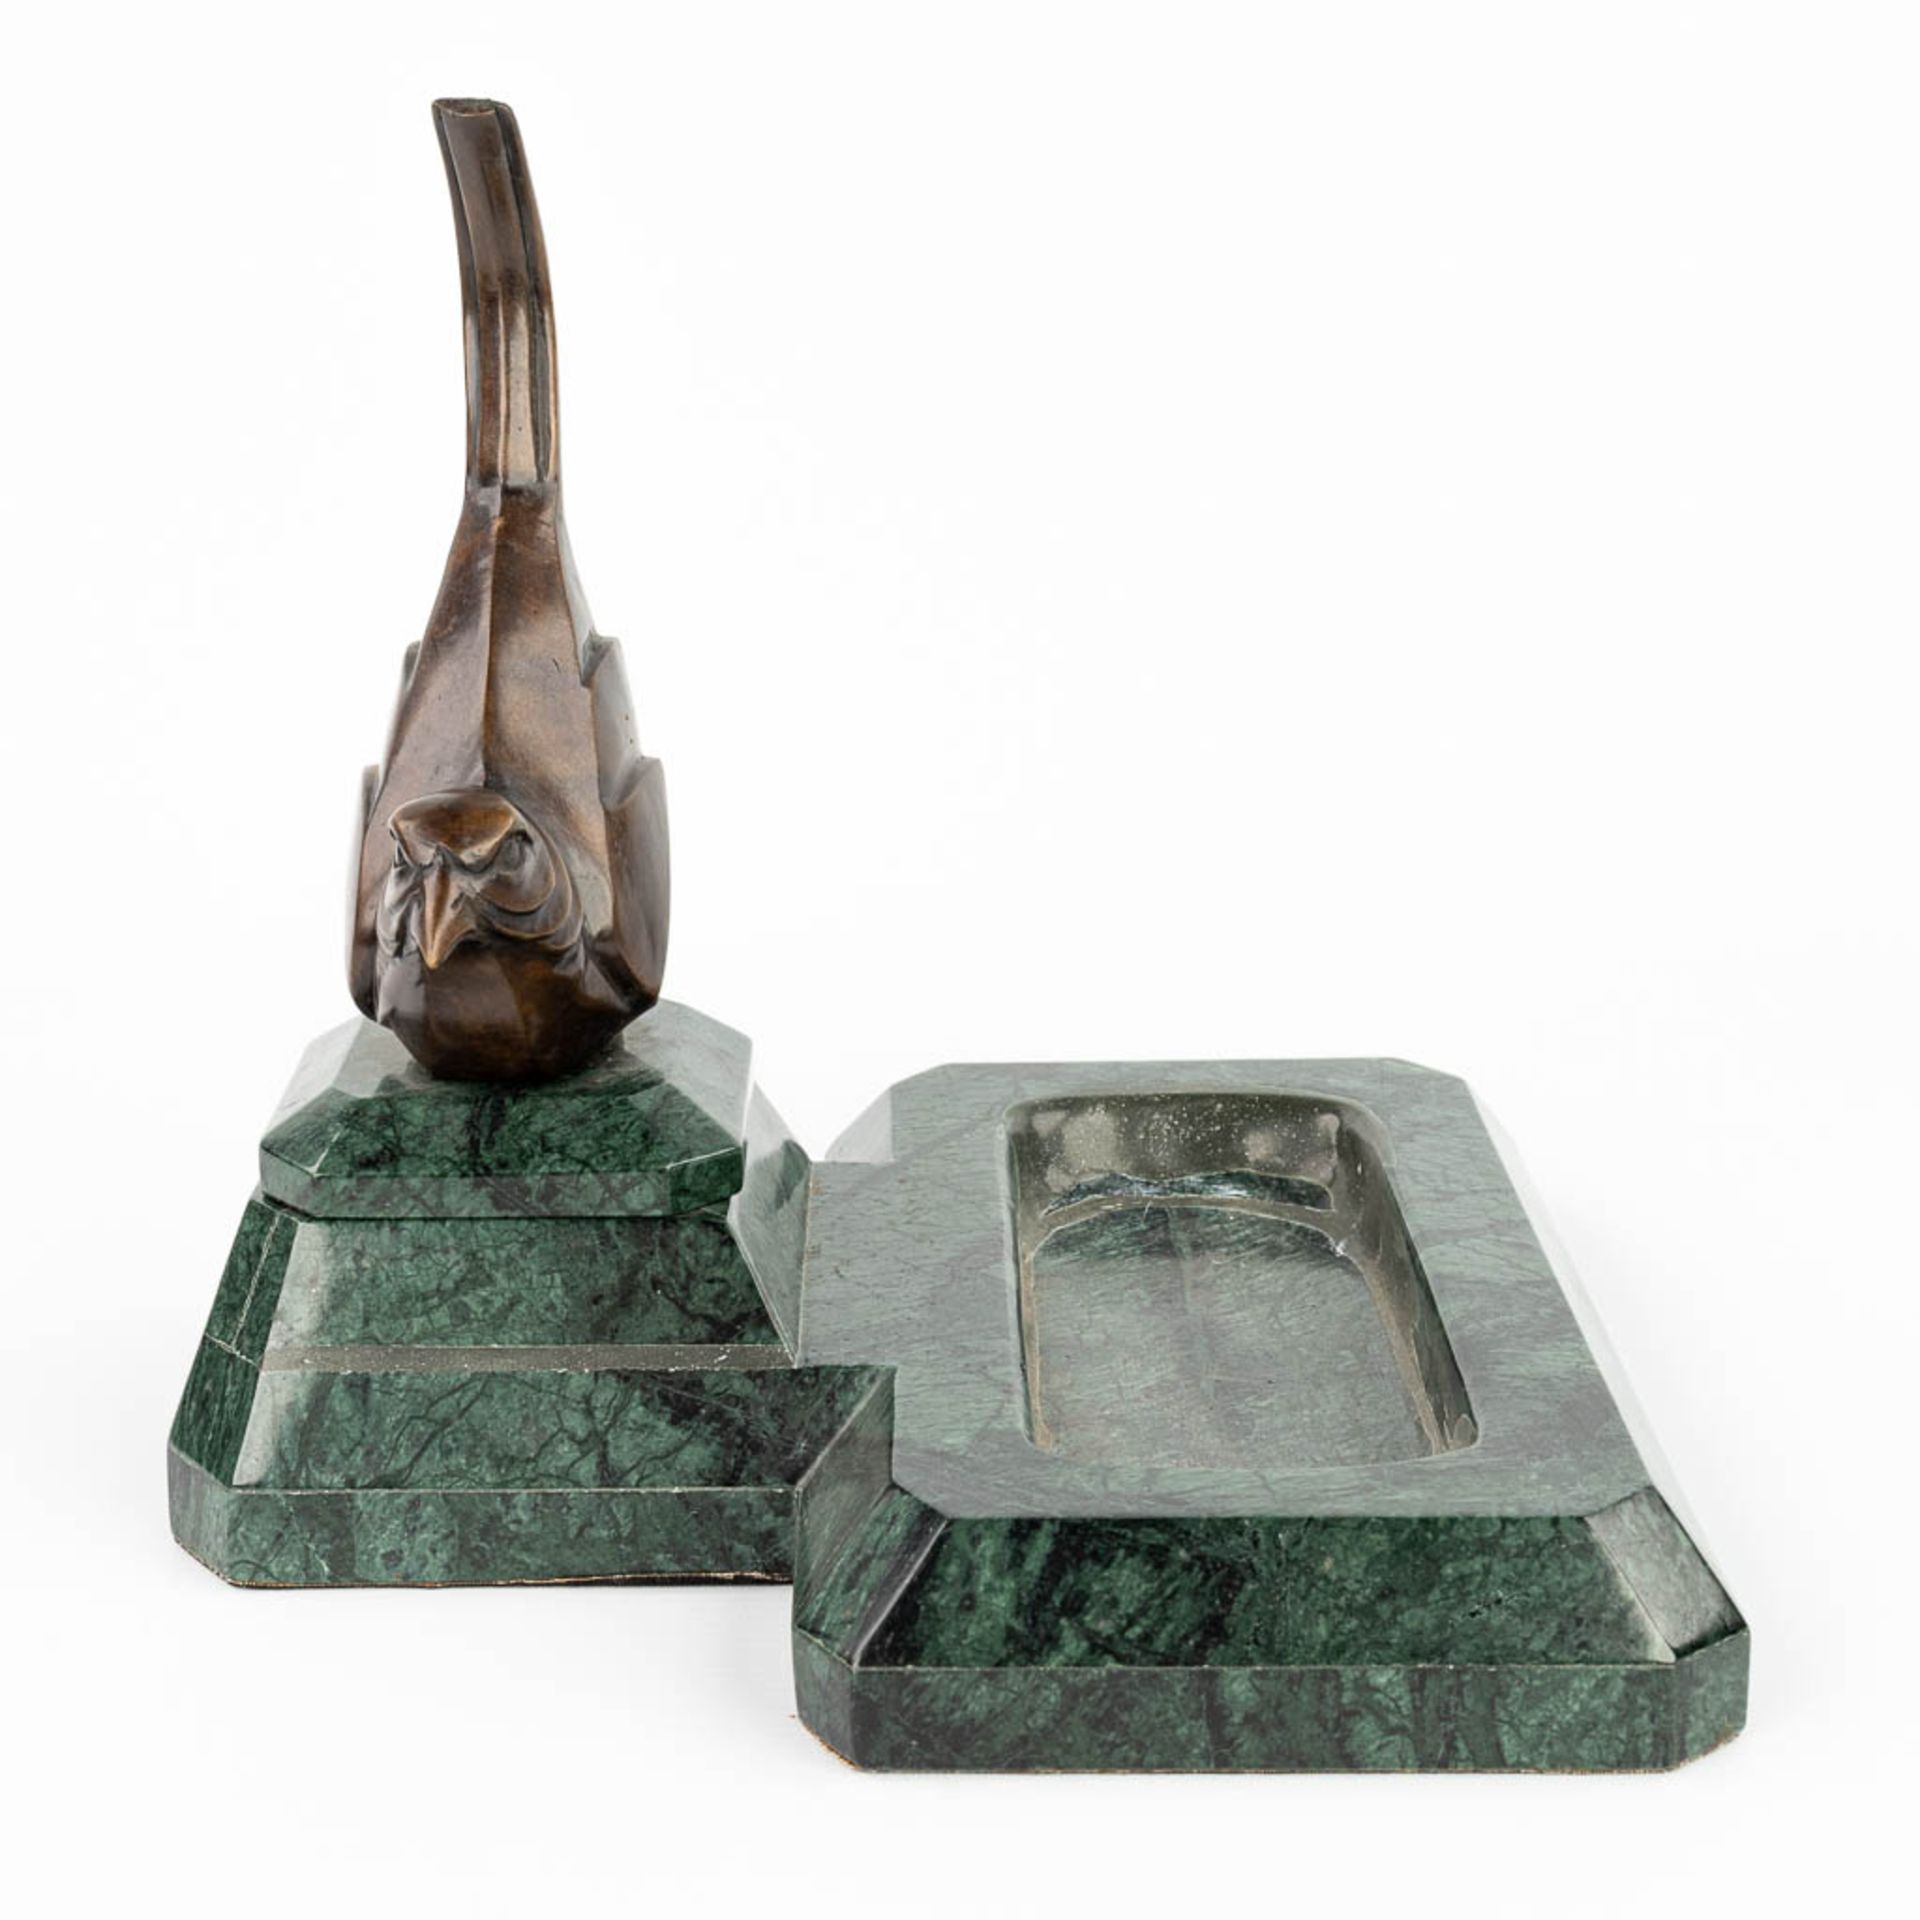 A 'Vide Poche' made of marble with a bird made of bronze in art deco style. - Bild 5 aus 10